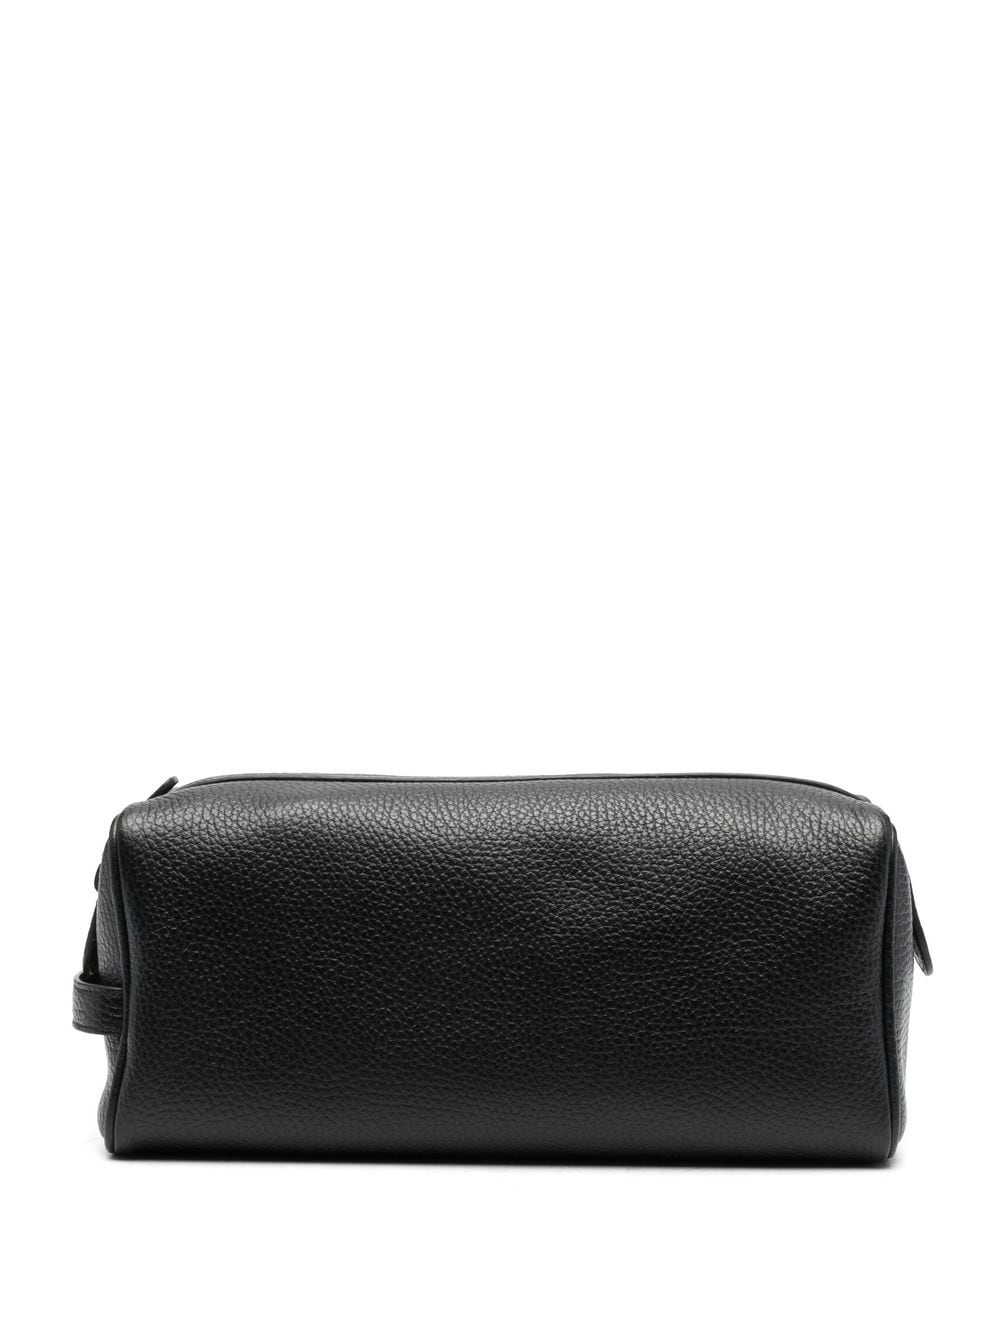 Common Projects logo-stamp leather wash bag - Black von Common Projects